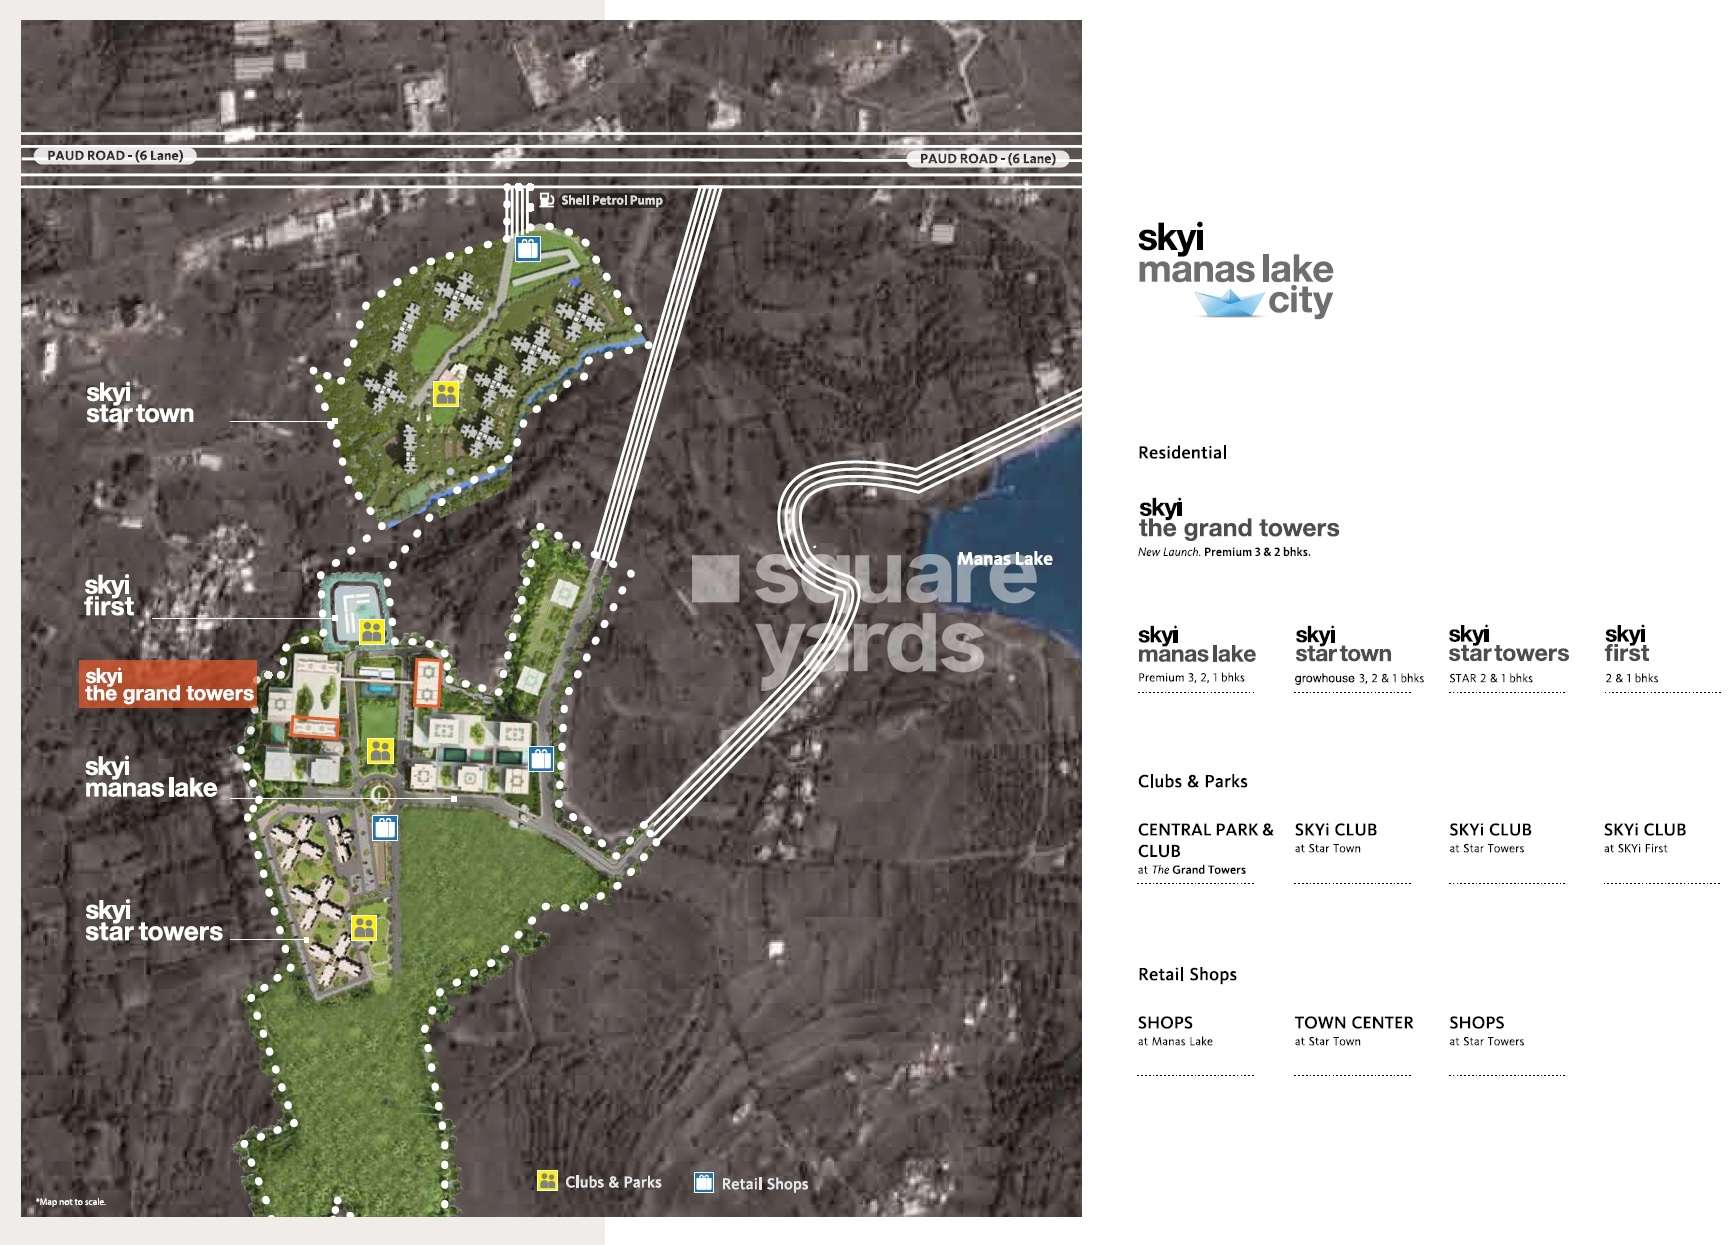 skyi star towers project master plan image3 8956